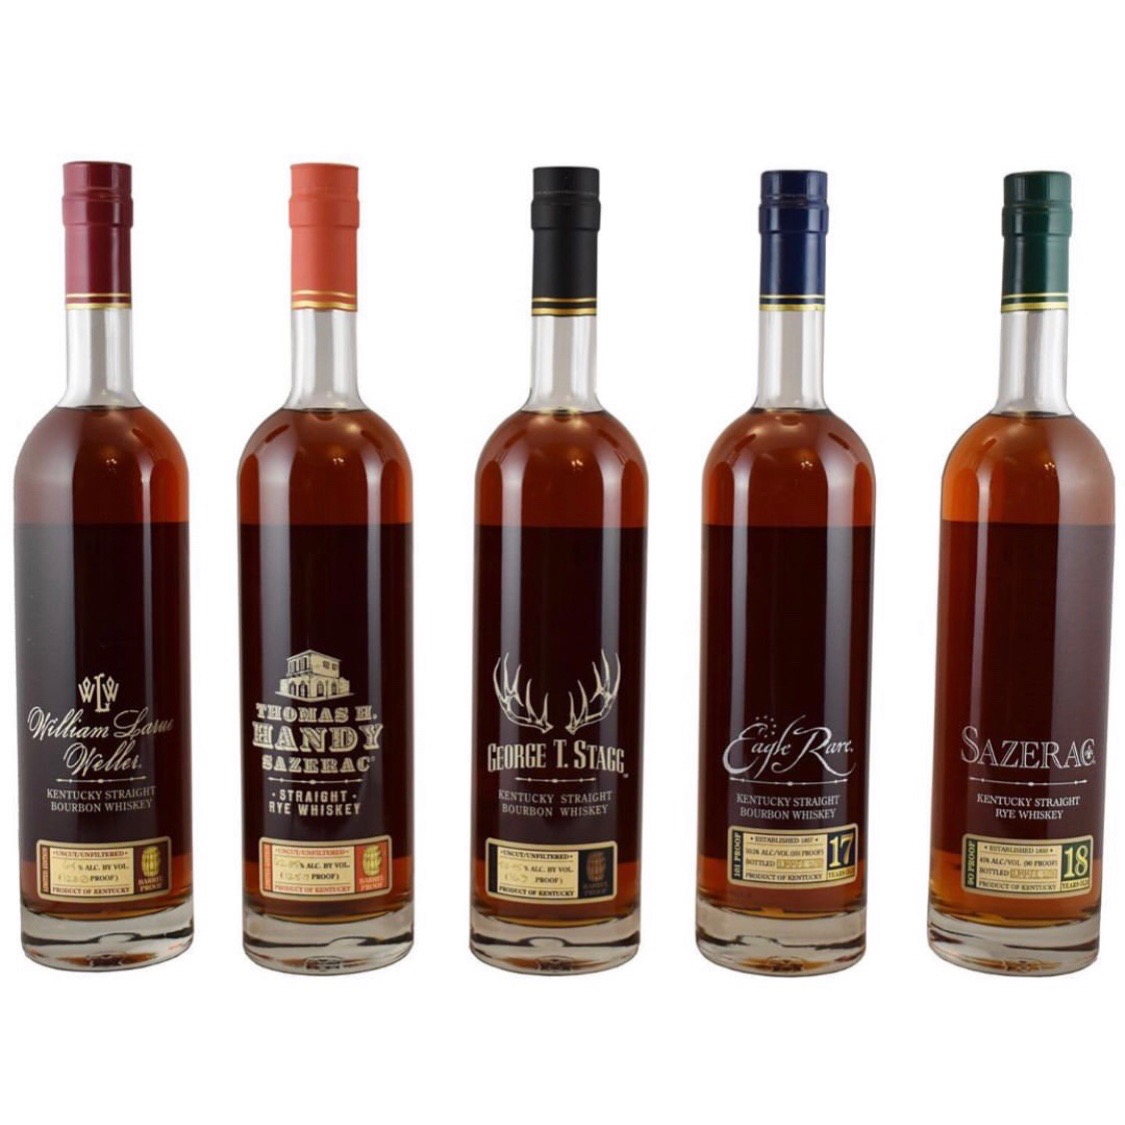 BUFFALO TRACE DISTILLERY RELEASES ITS MUCH ANTICIPATED 2020 ANTIQUE